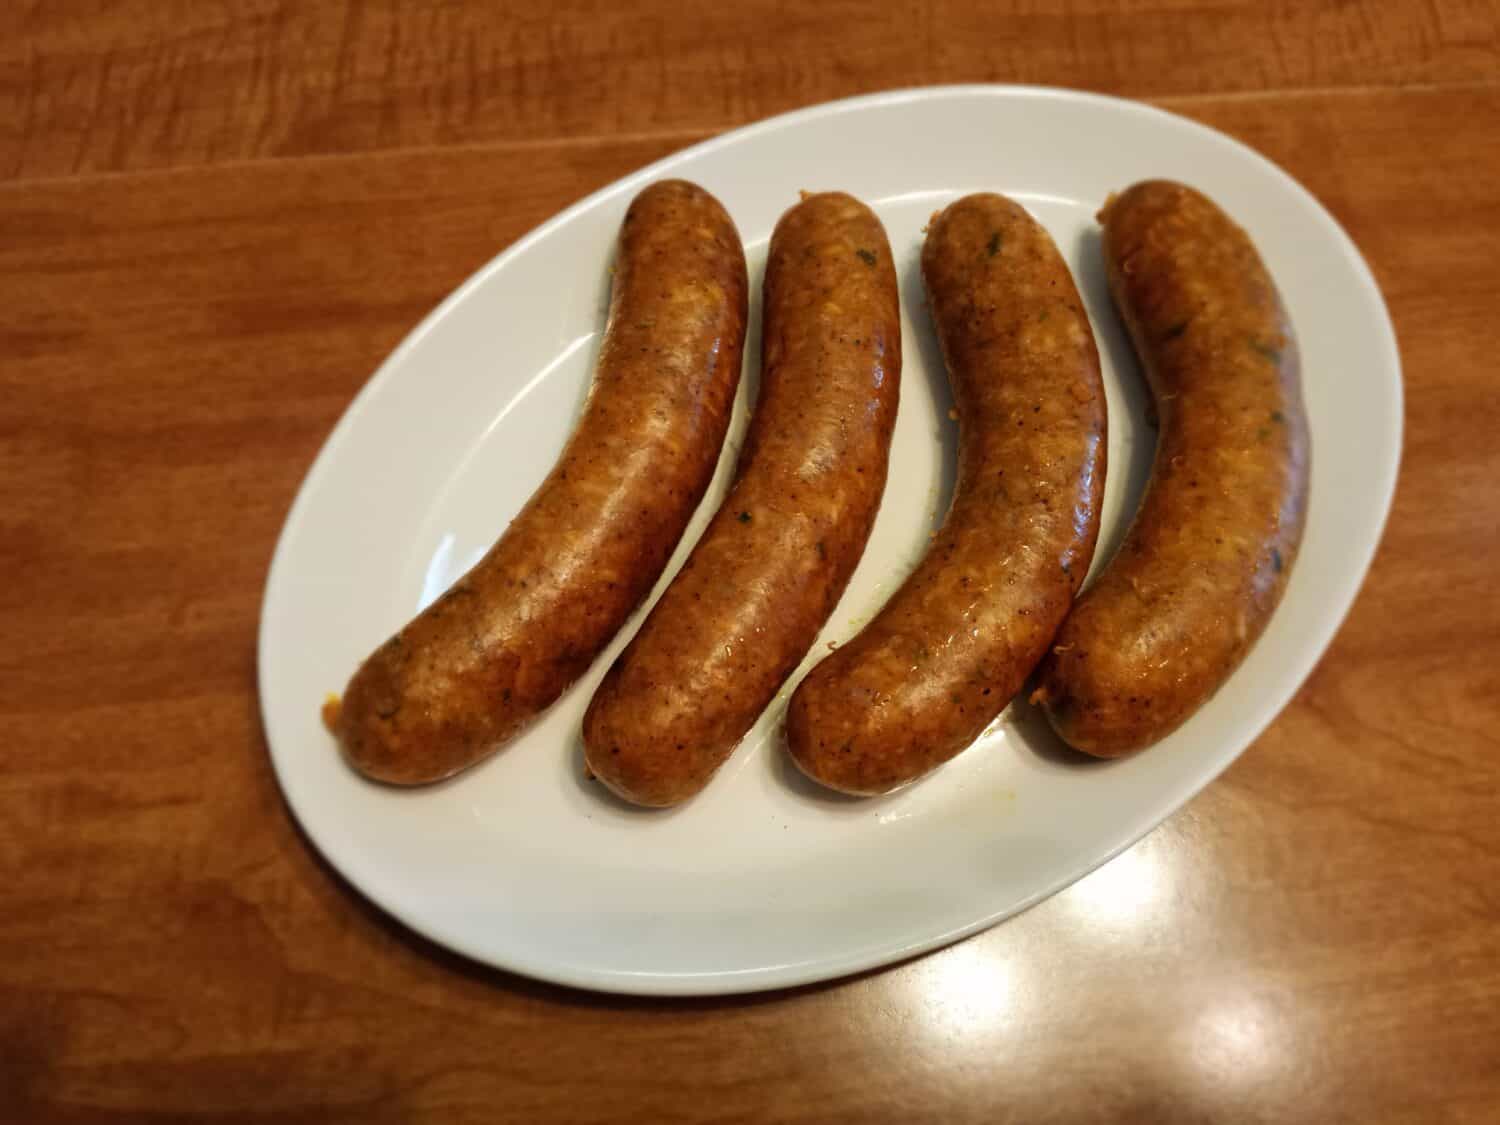 Four Boudin Links Stuffed With Ground Pork, Rice, Onions, and Seasoning in Natural Pork Casing. Louisiana Cajun Cuisine